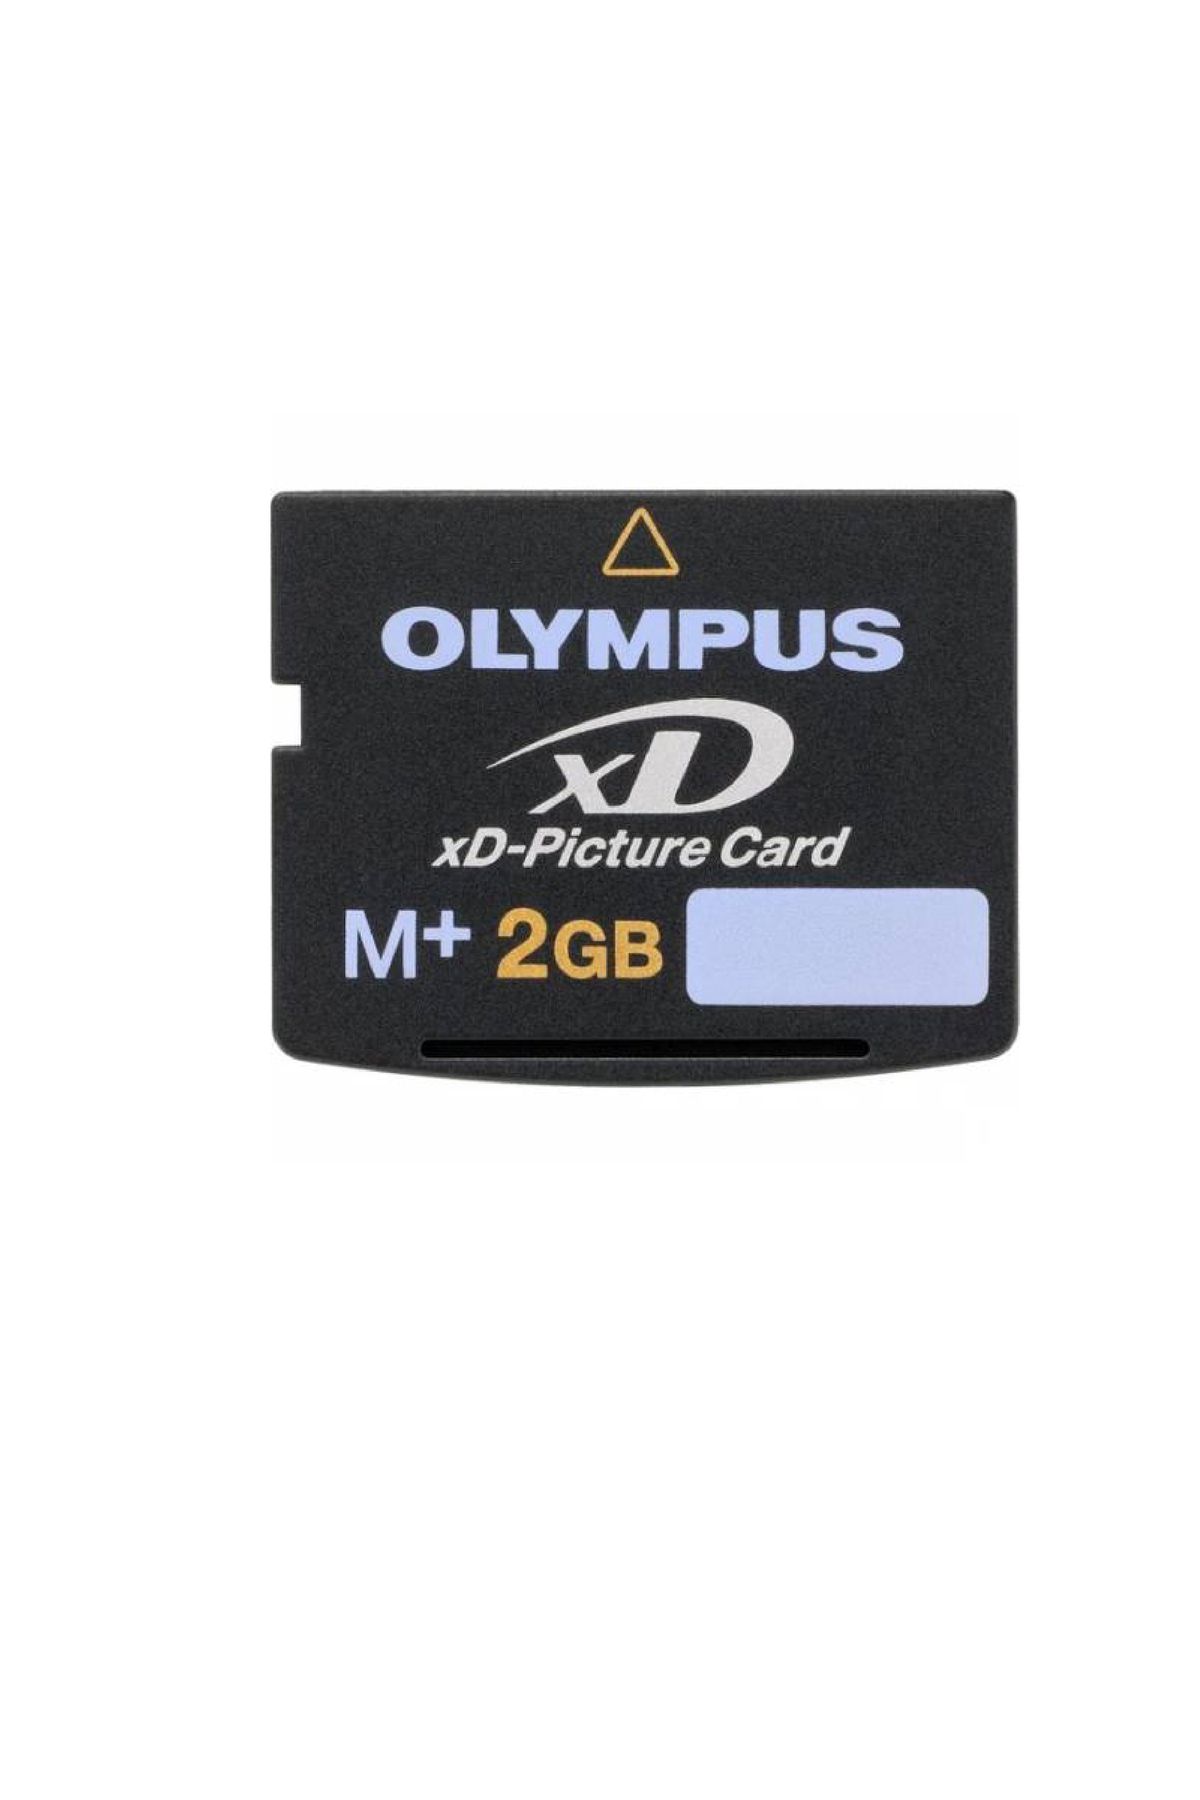 Olympus 2GB xD Picture Card Type M+